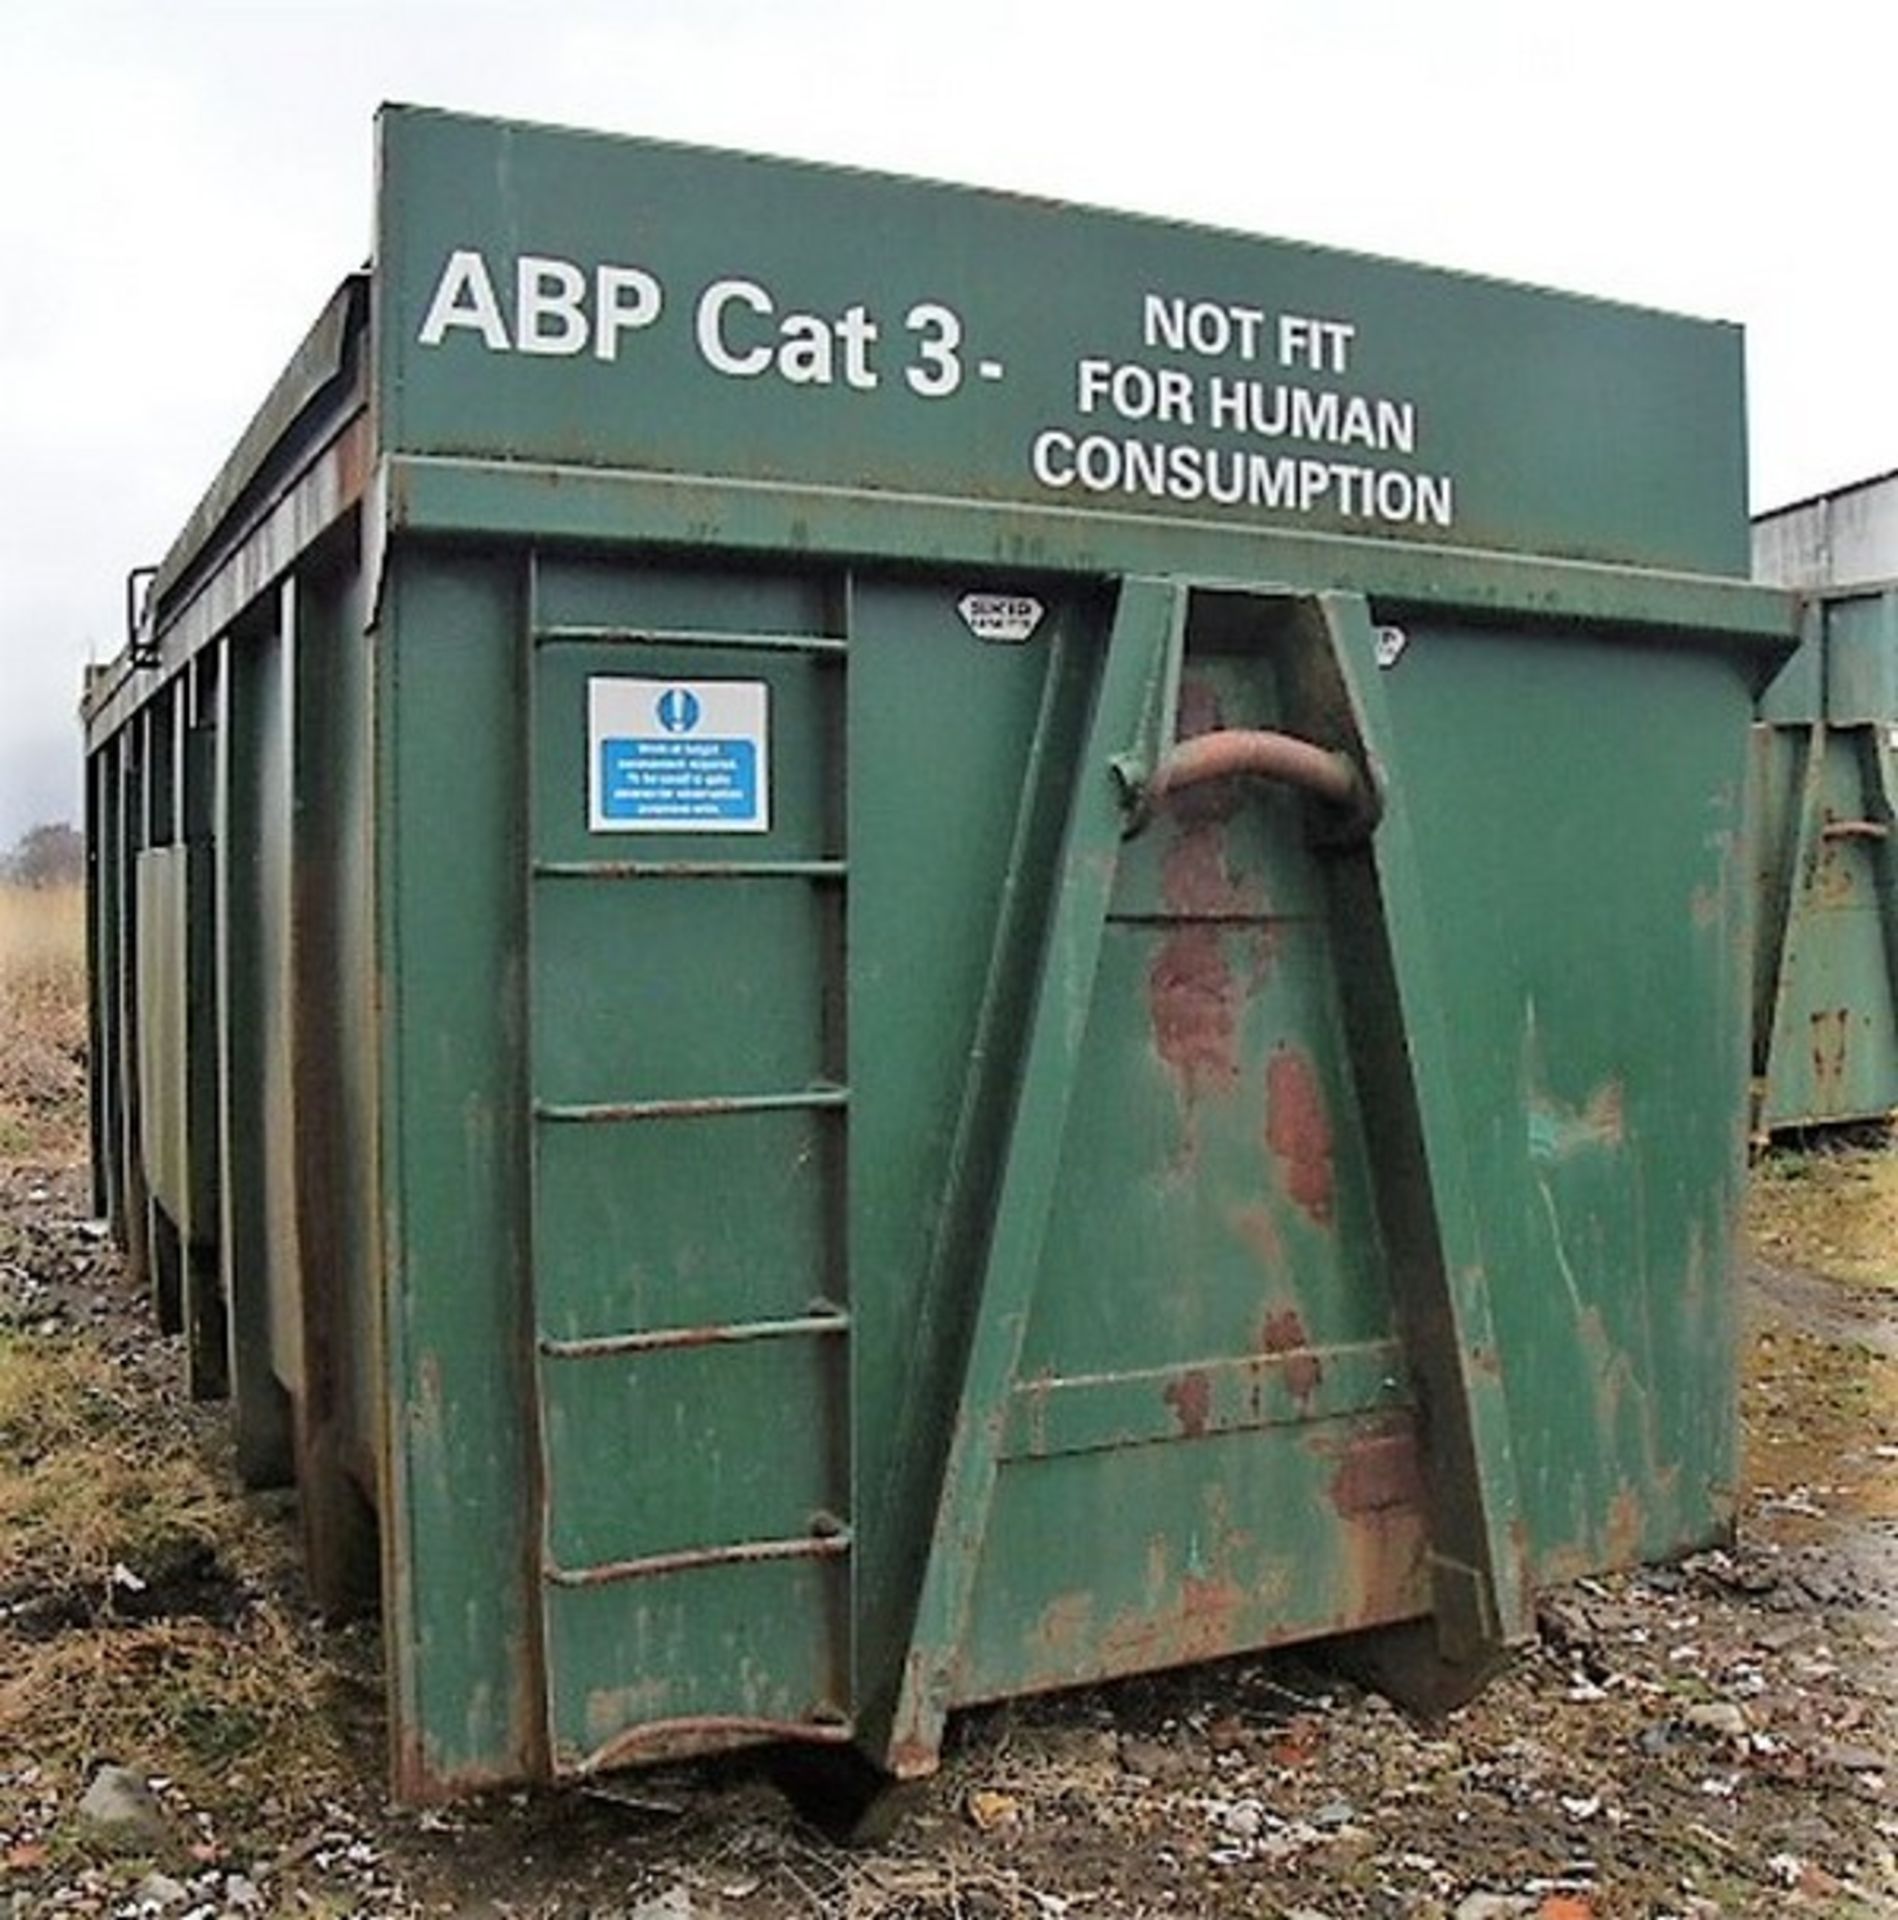 FOOD WASTE SKIP C/W ENCLOSED TOP. MANUFACTURED BY C F BOOTH. SOLD FROM ERROL AUCTION SITE. VIEWING A - Image 2 of 4